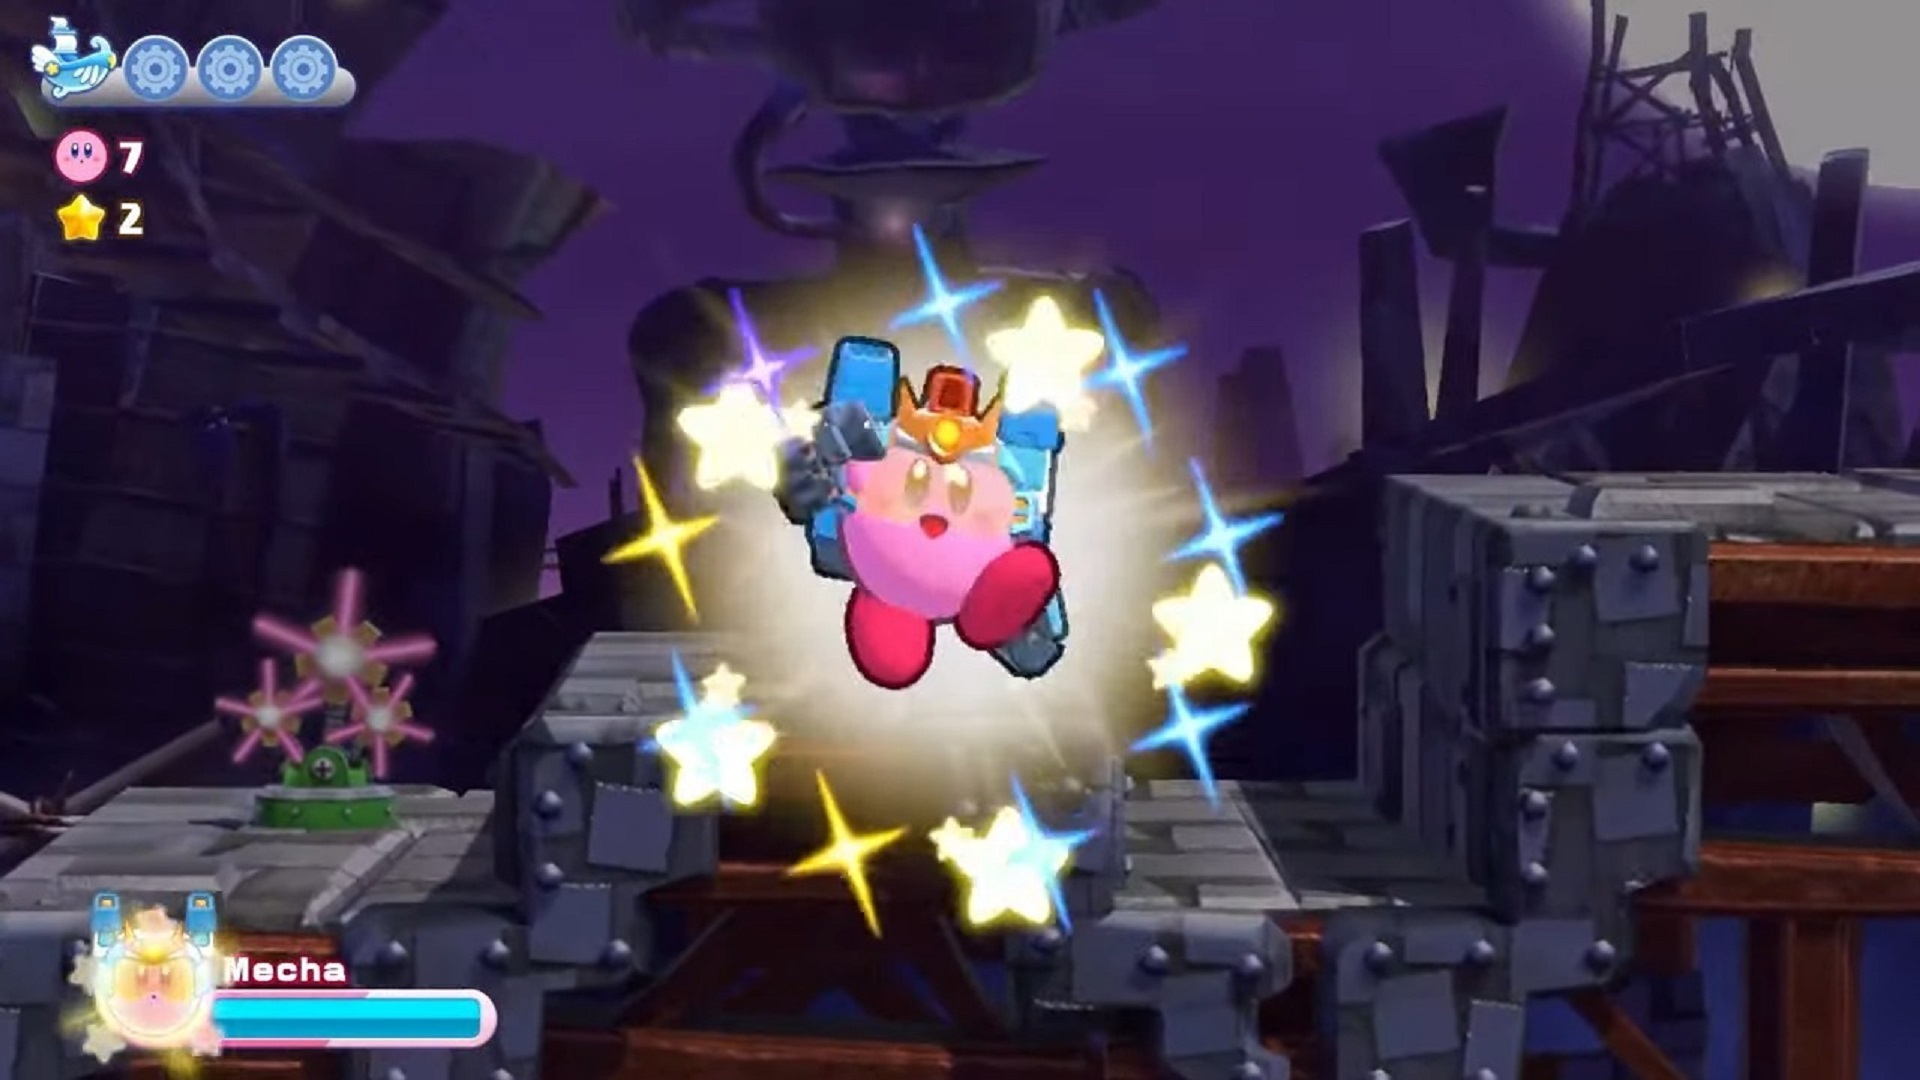 Kirby's Return to Dream Land Deluxe - Overview Trailer 